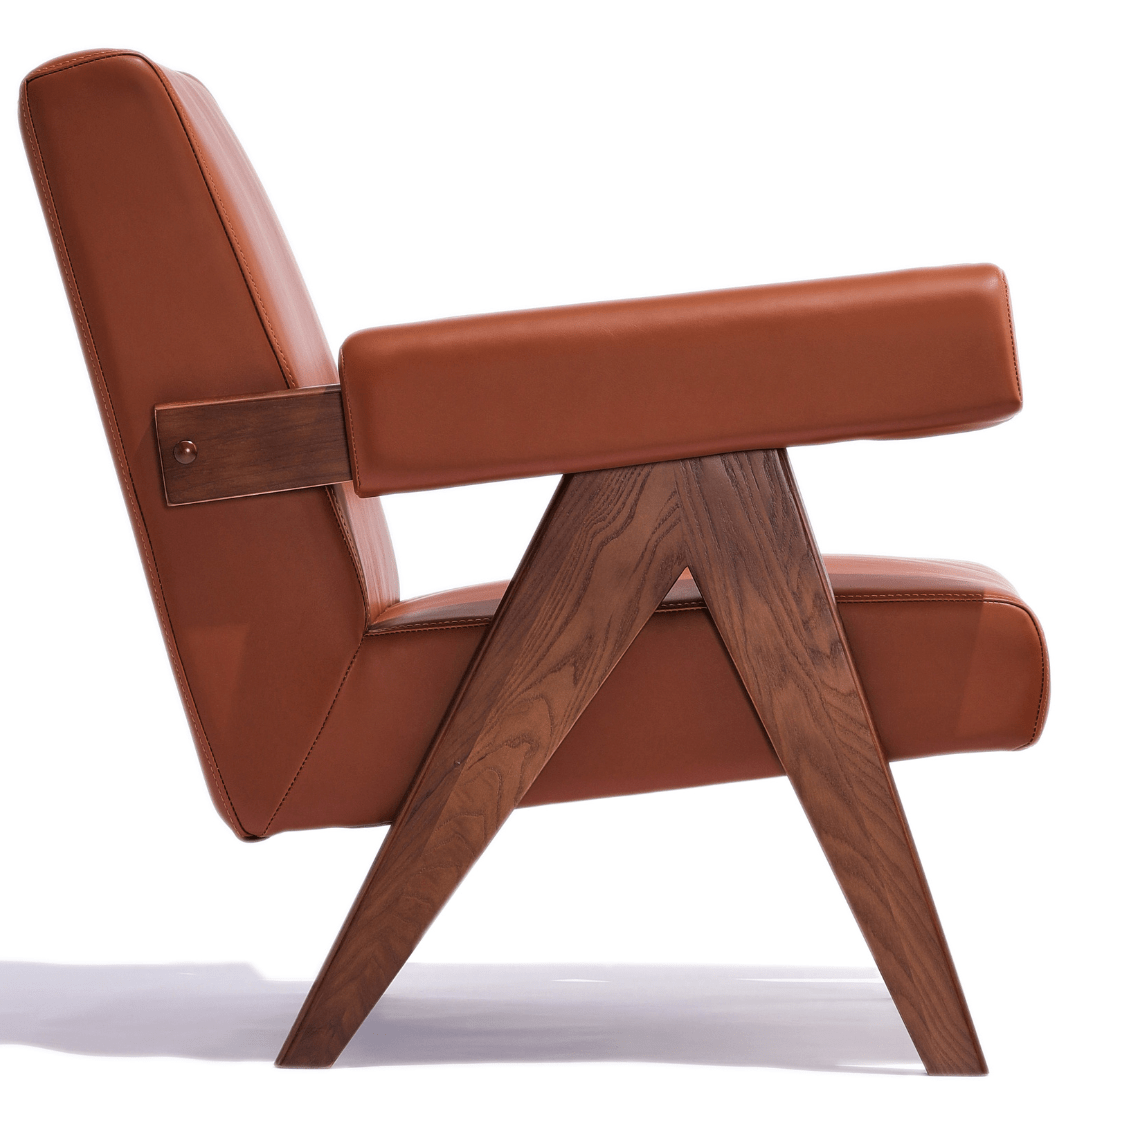 Pierre J Brown Soft Lounge Chair - Your Bar Stools Canada